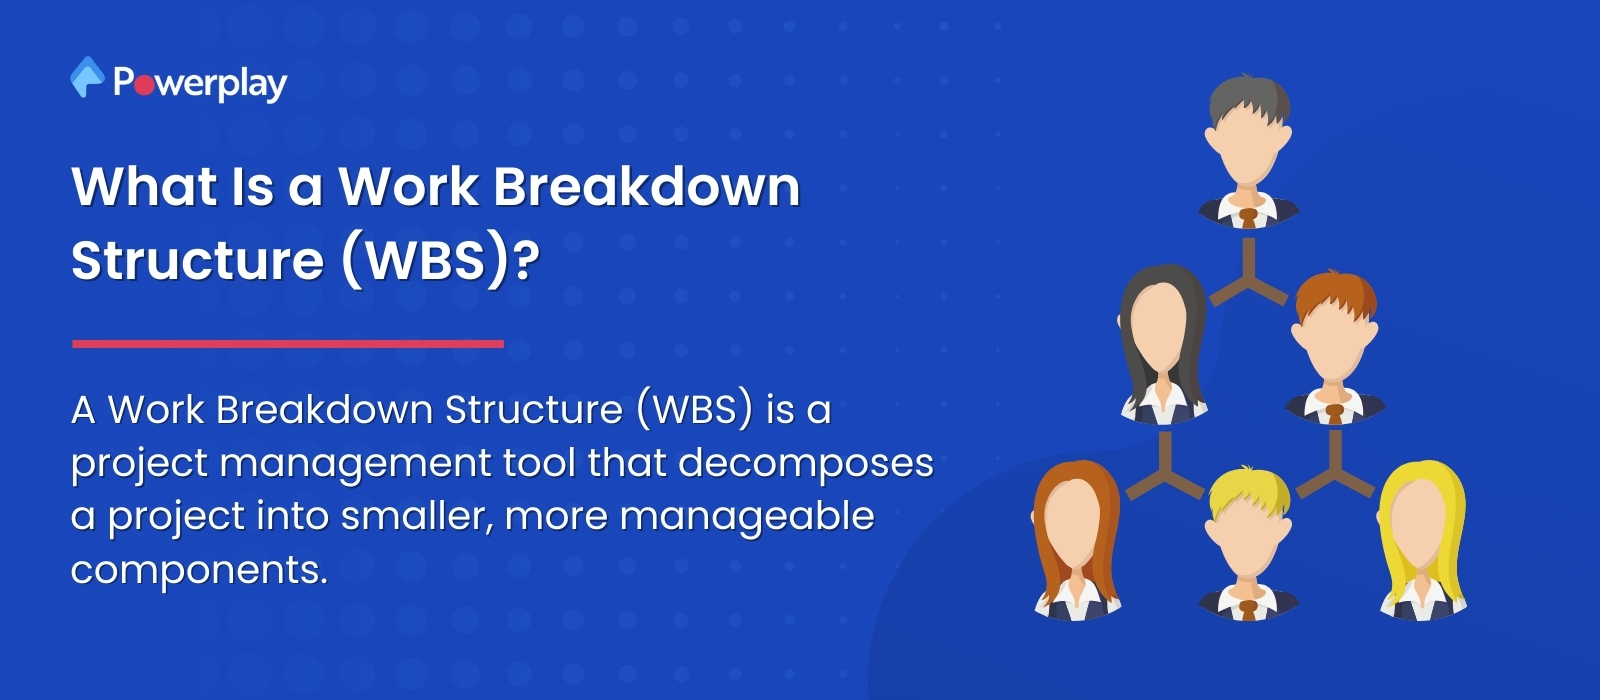 What Is a Work Breakdown Structure